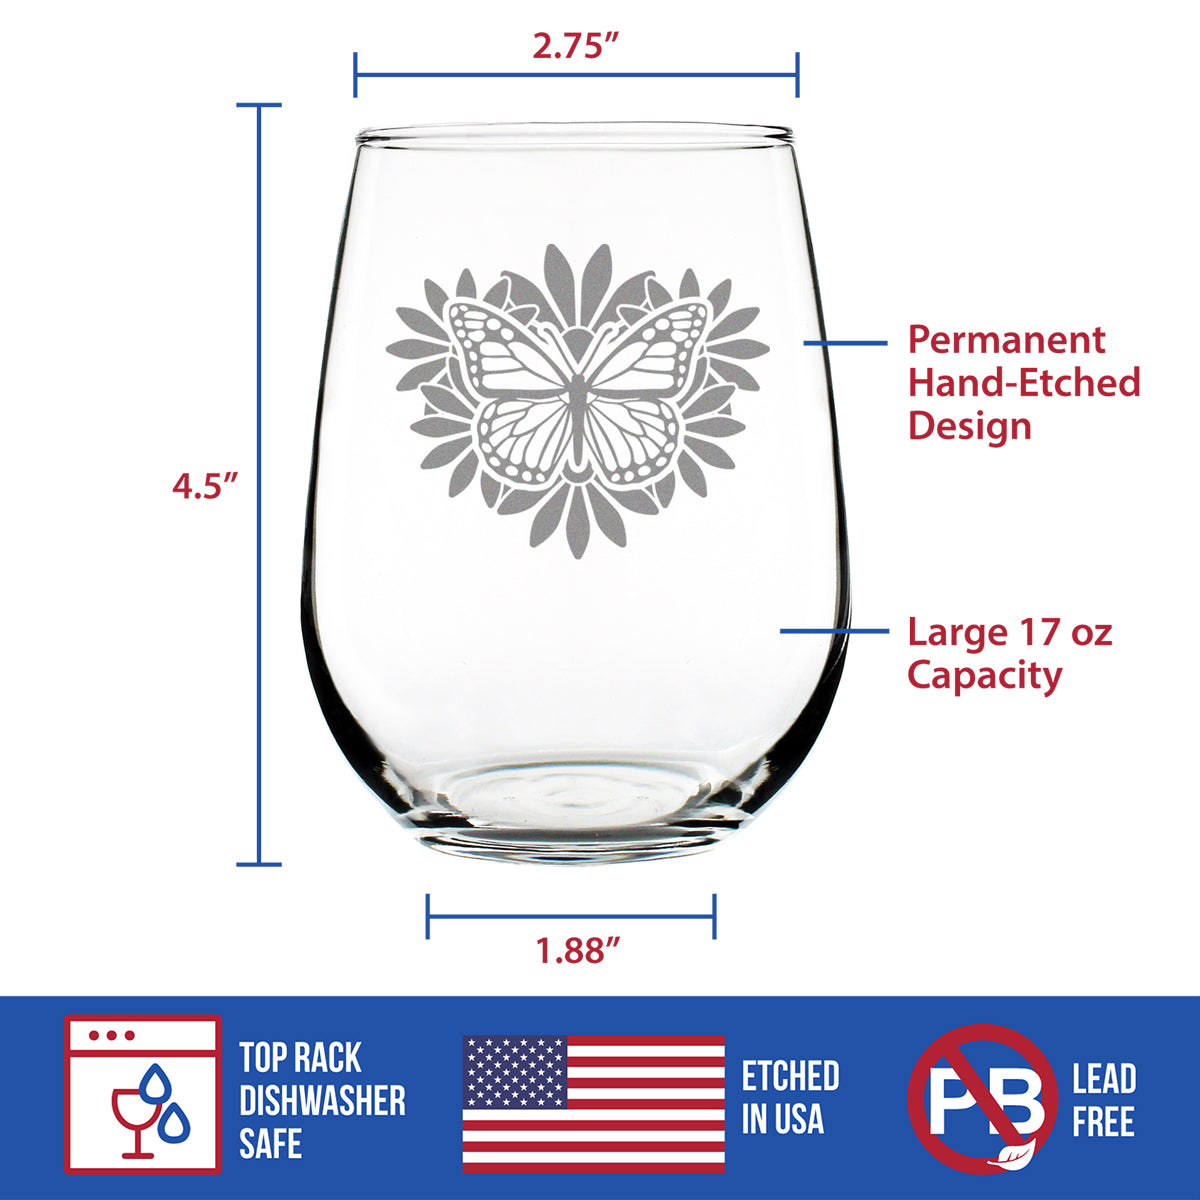 Monarch Butterfly Stemless Wine Glass - Floral Decor and Outdoorsy Gifts for Gardeners - Large 17 Oz Glasses